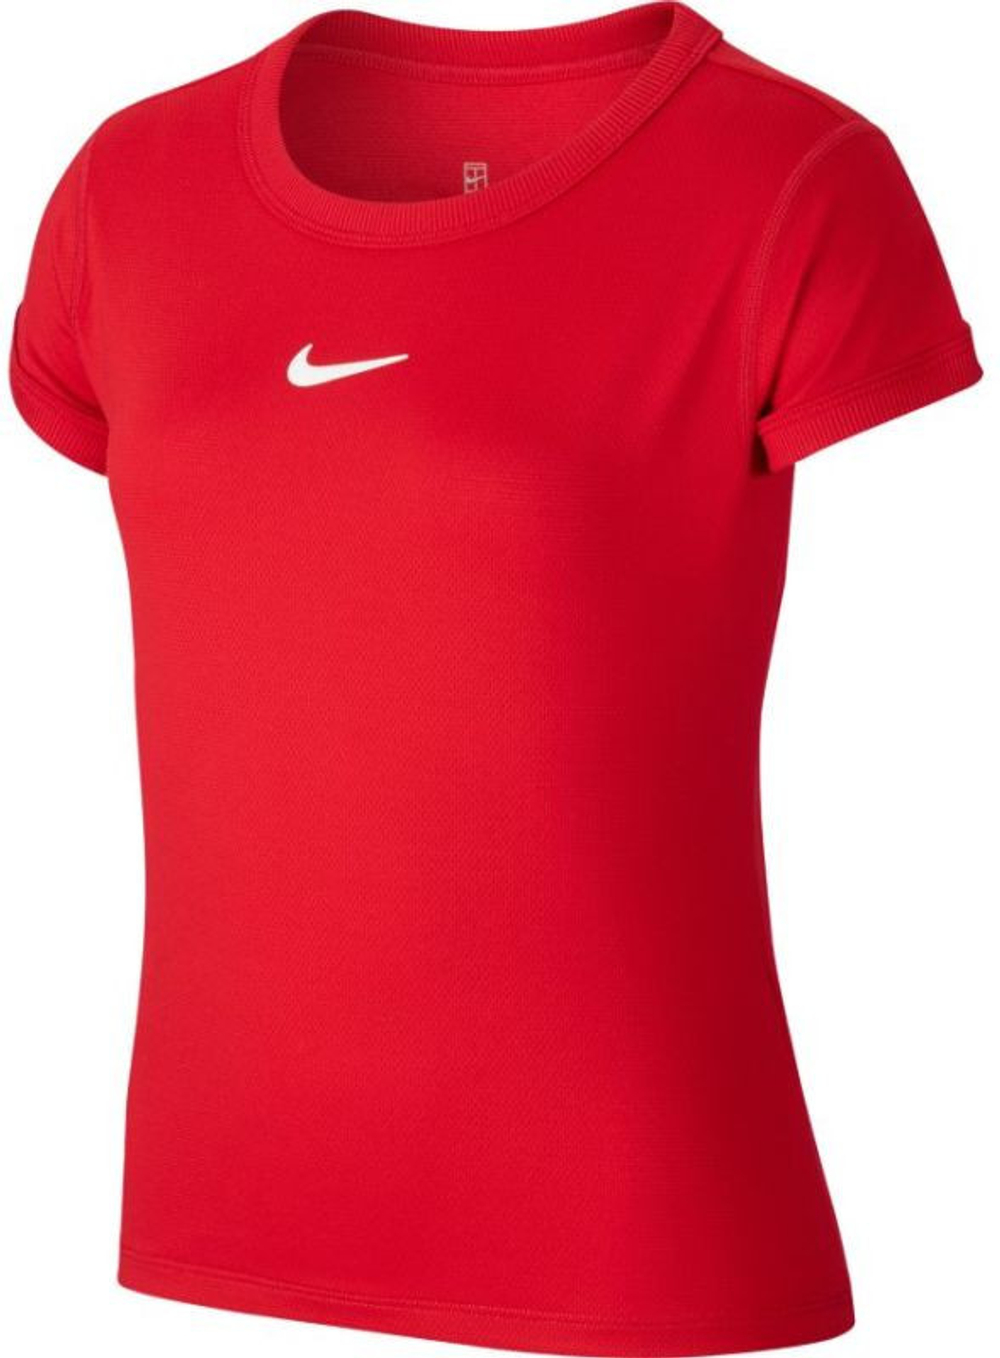 Nike Court G Dry Top SS - gym red/white 